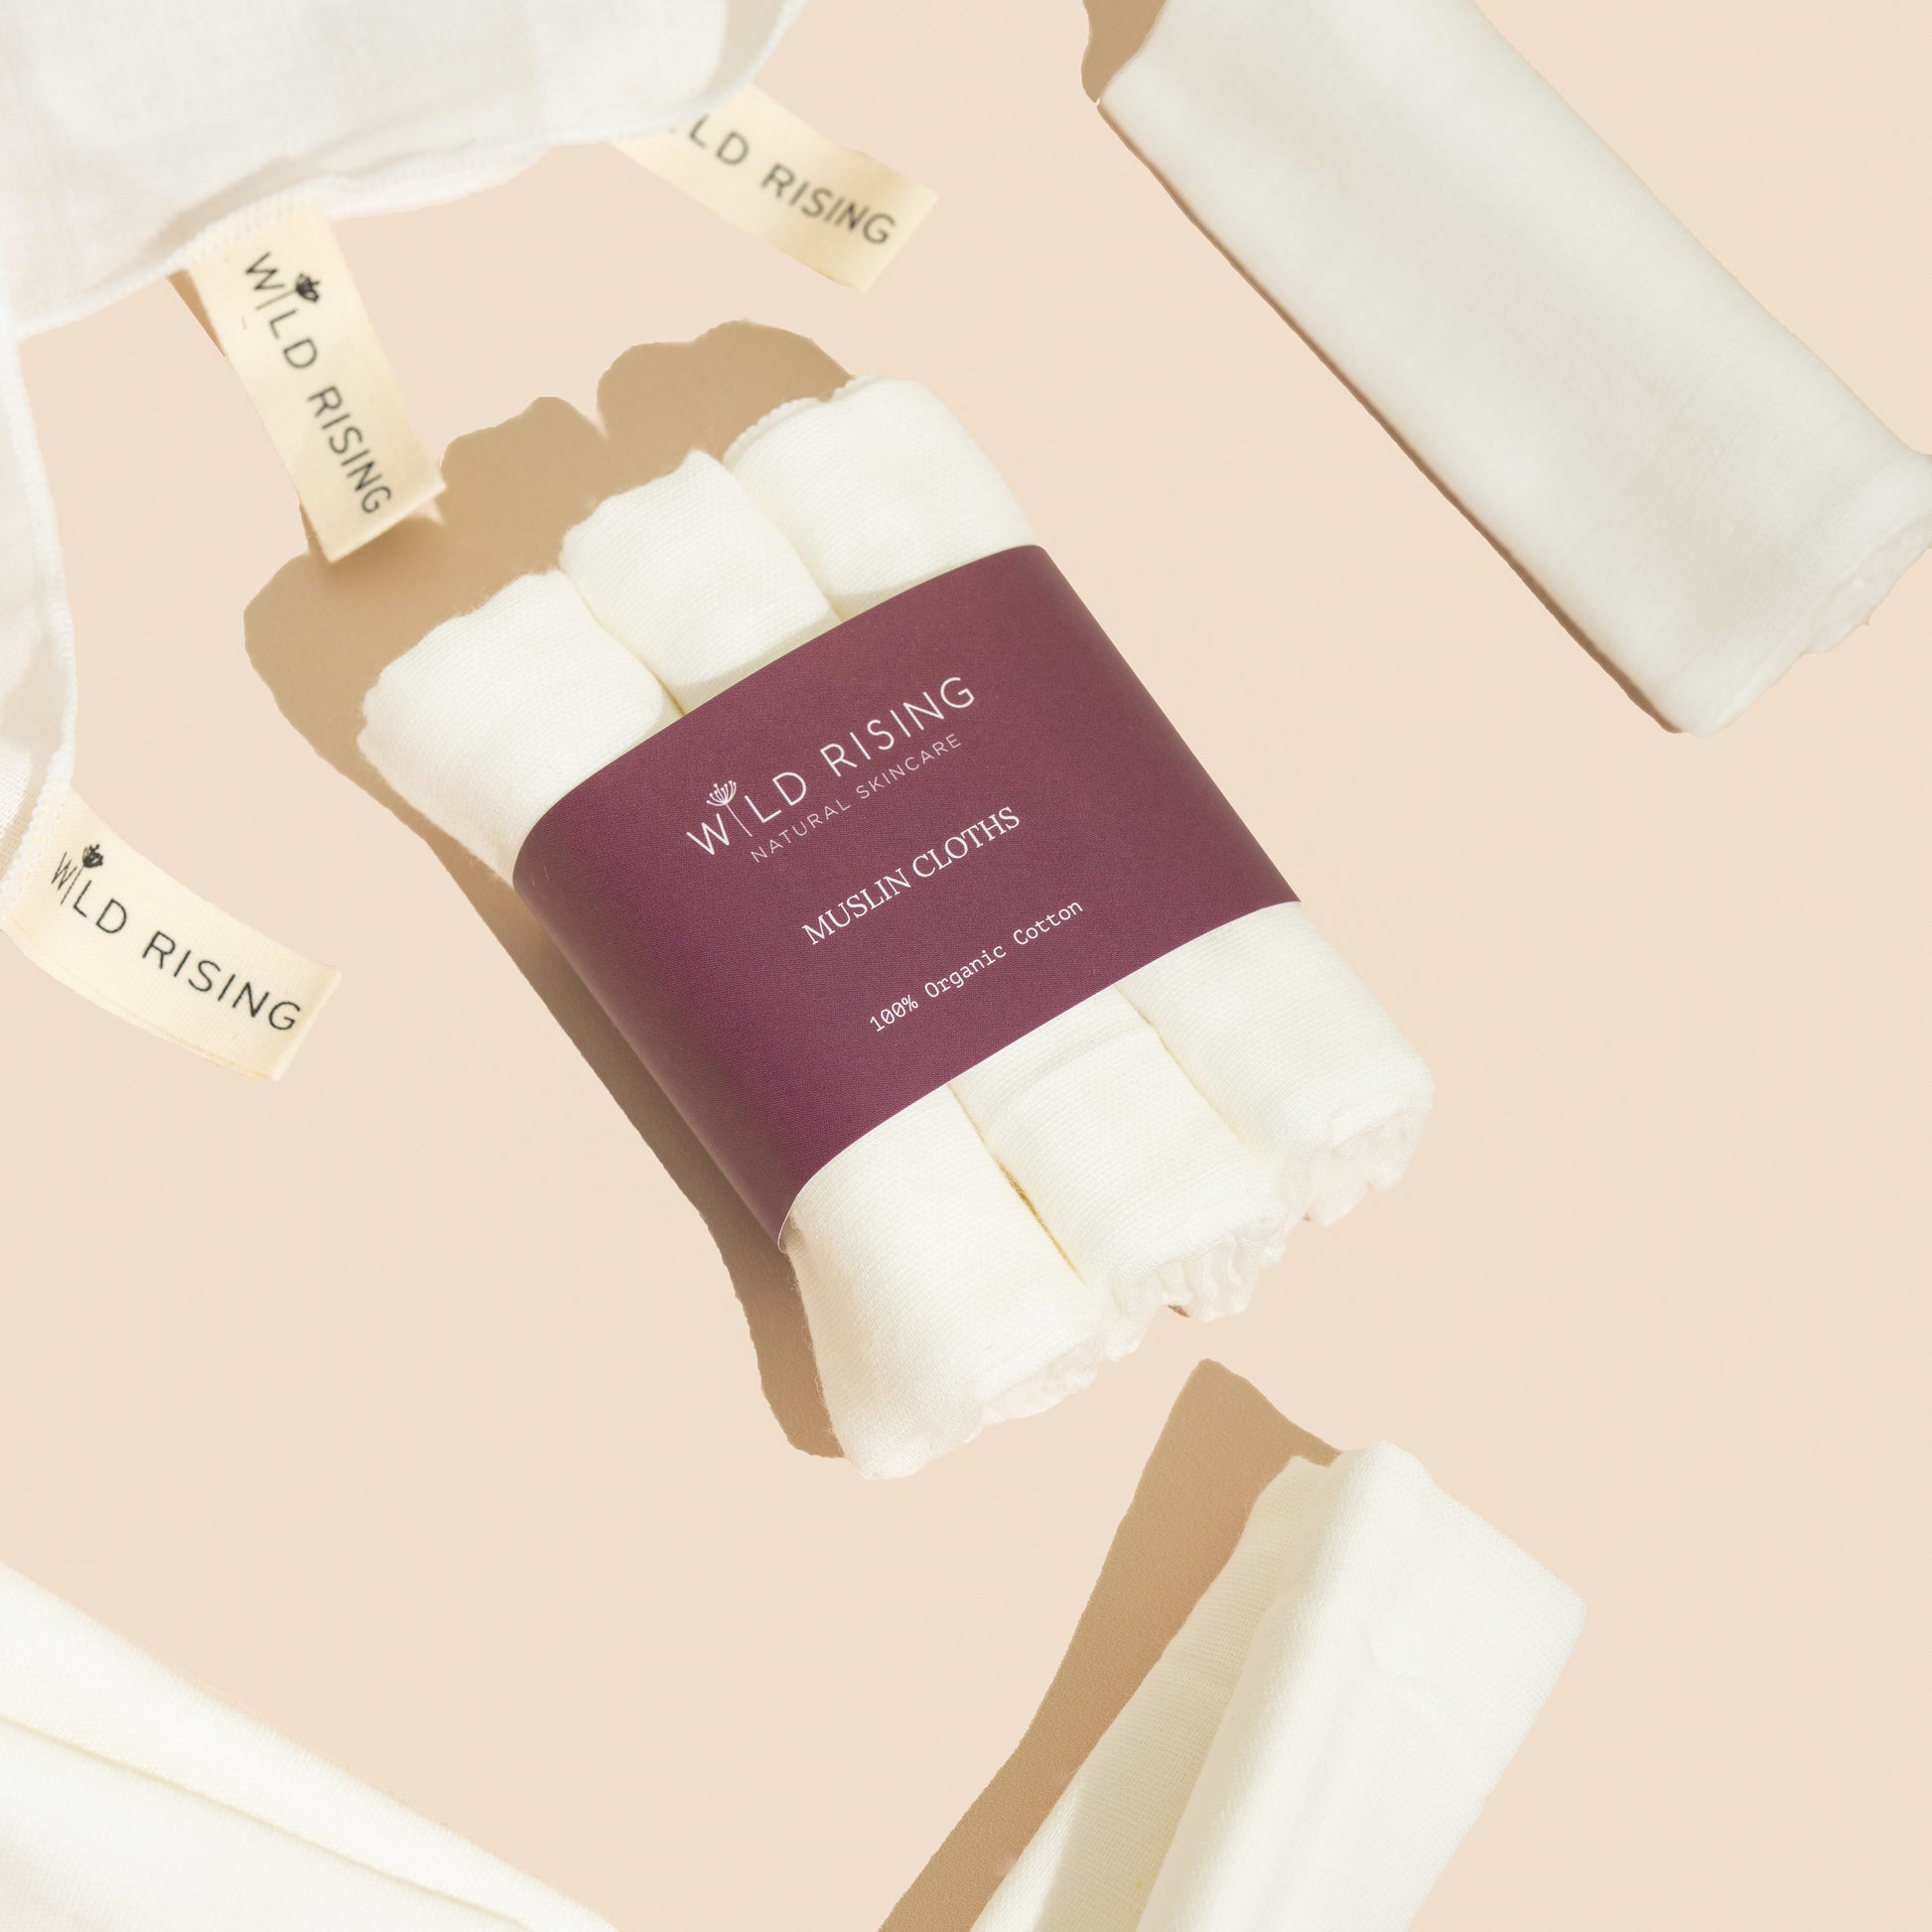 Wild Rising Skincare Cleansing Muslin Cloths